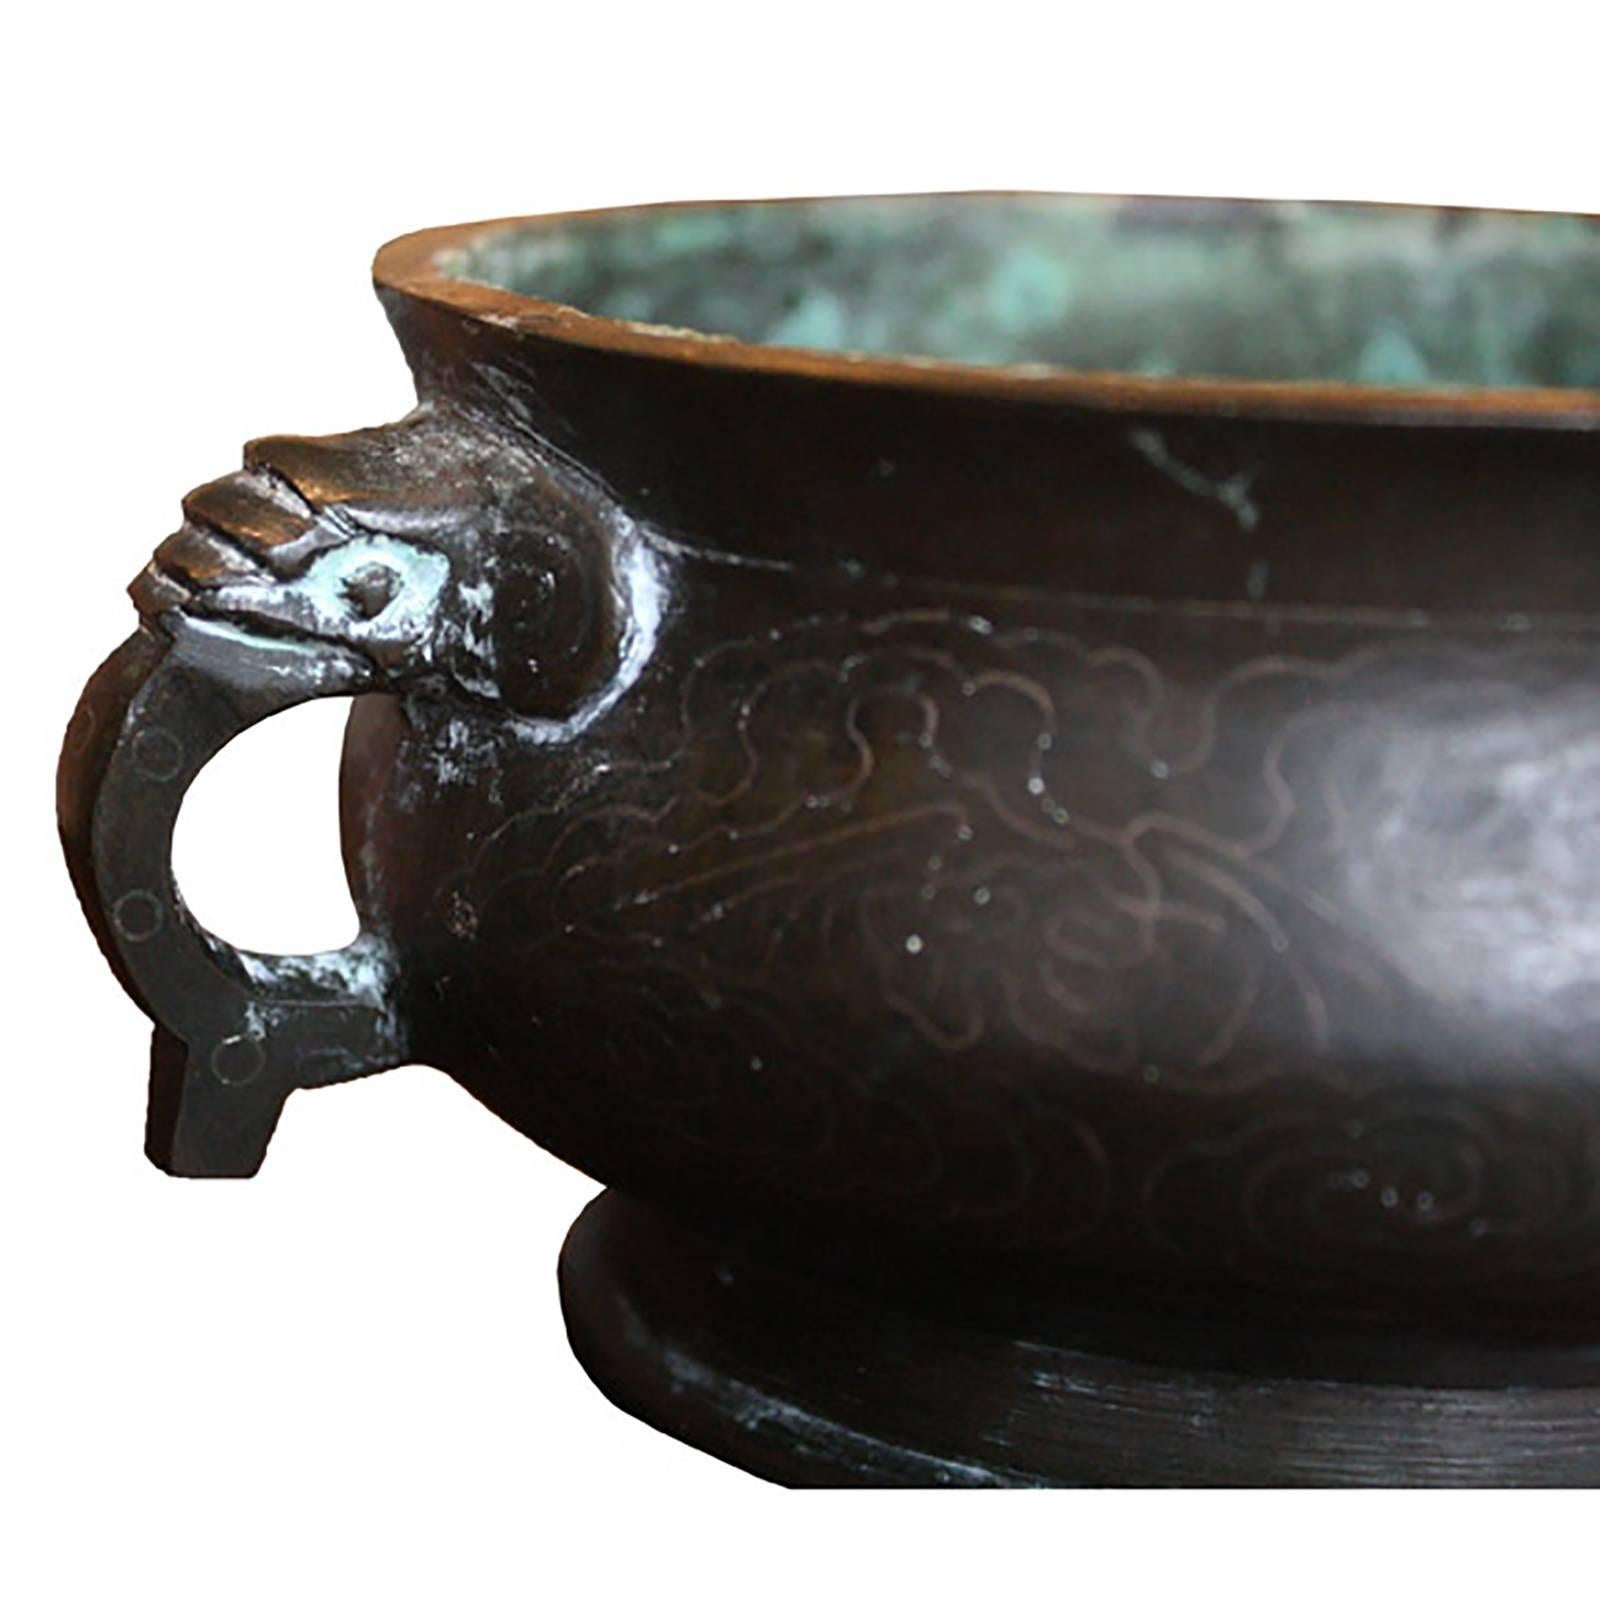 Delicately engraved with clouds and cranes, this 18th century bronze censer once held incense, lit for prayer or meditation. Clouds represent heaven and cranes, thought to live very long lives, represent longevity. Its handles are auspicious